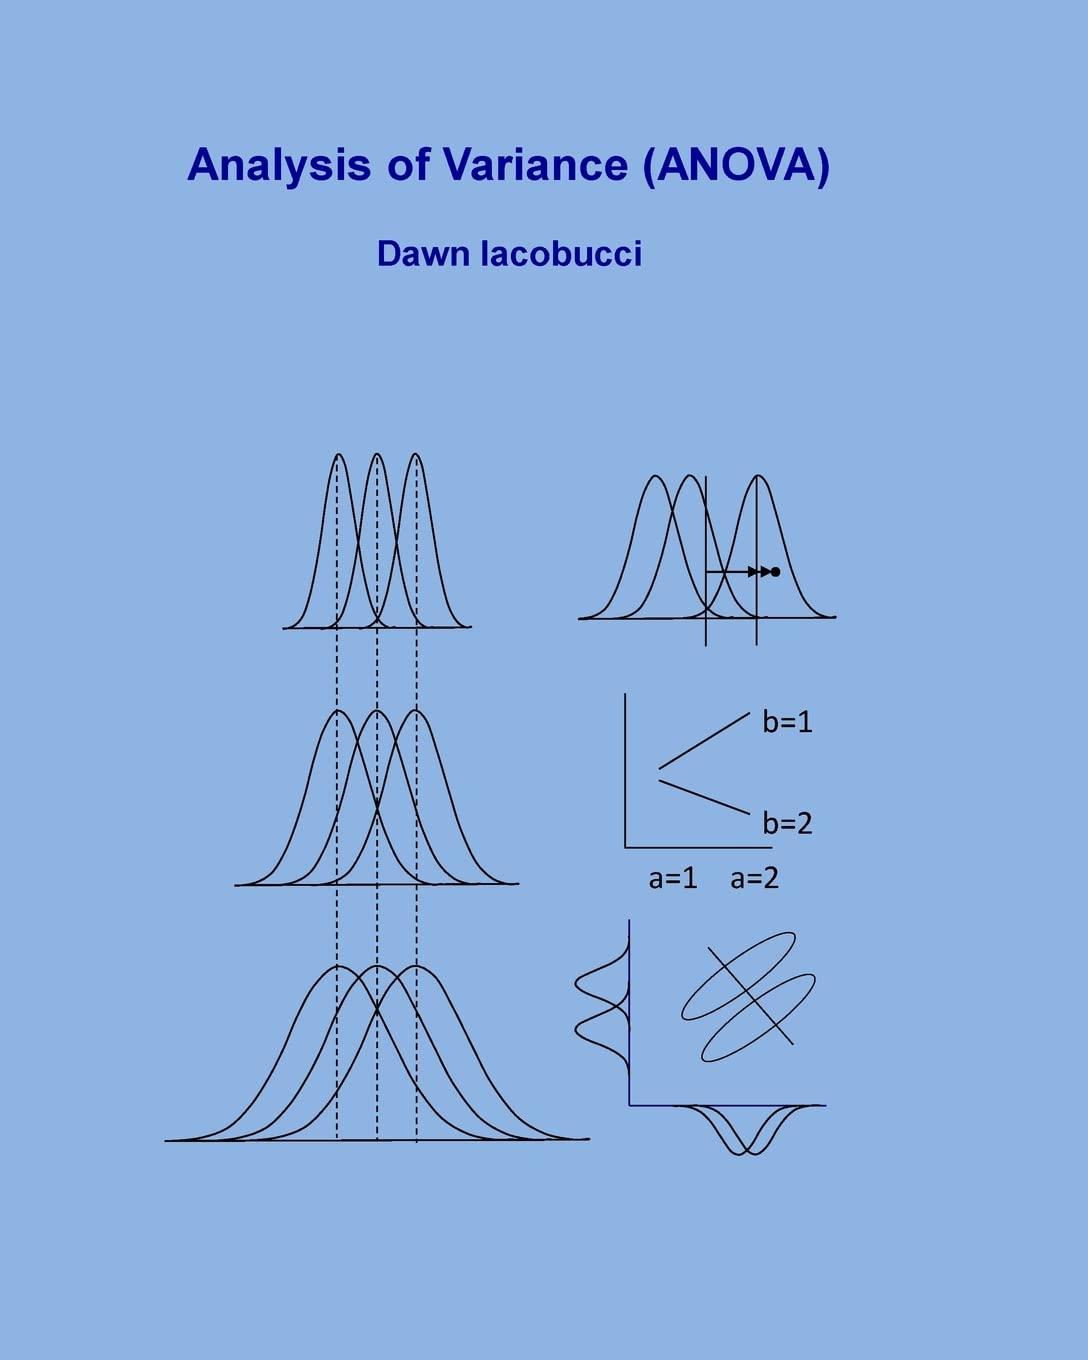 analysis of variance 1st edition dr. dawn iacobucci 1530332028, 9781530332021